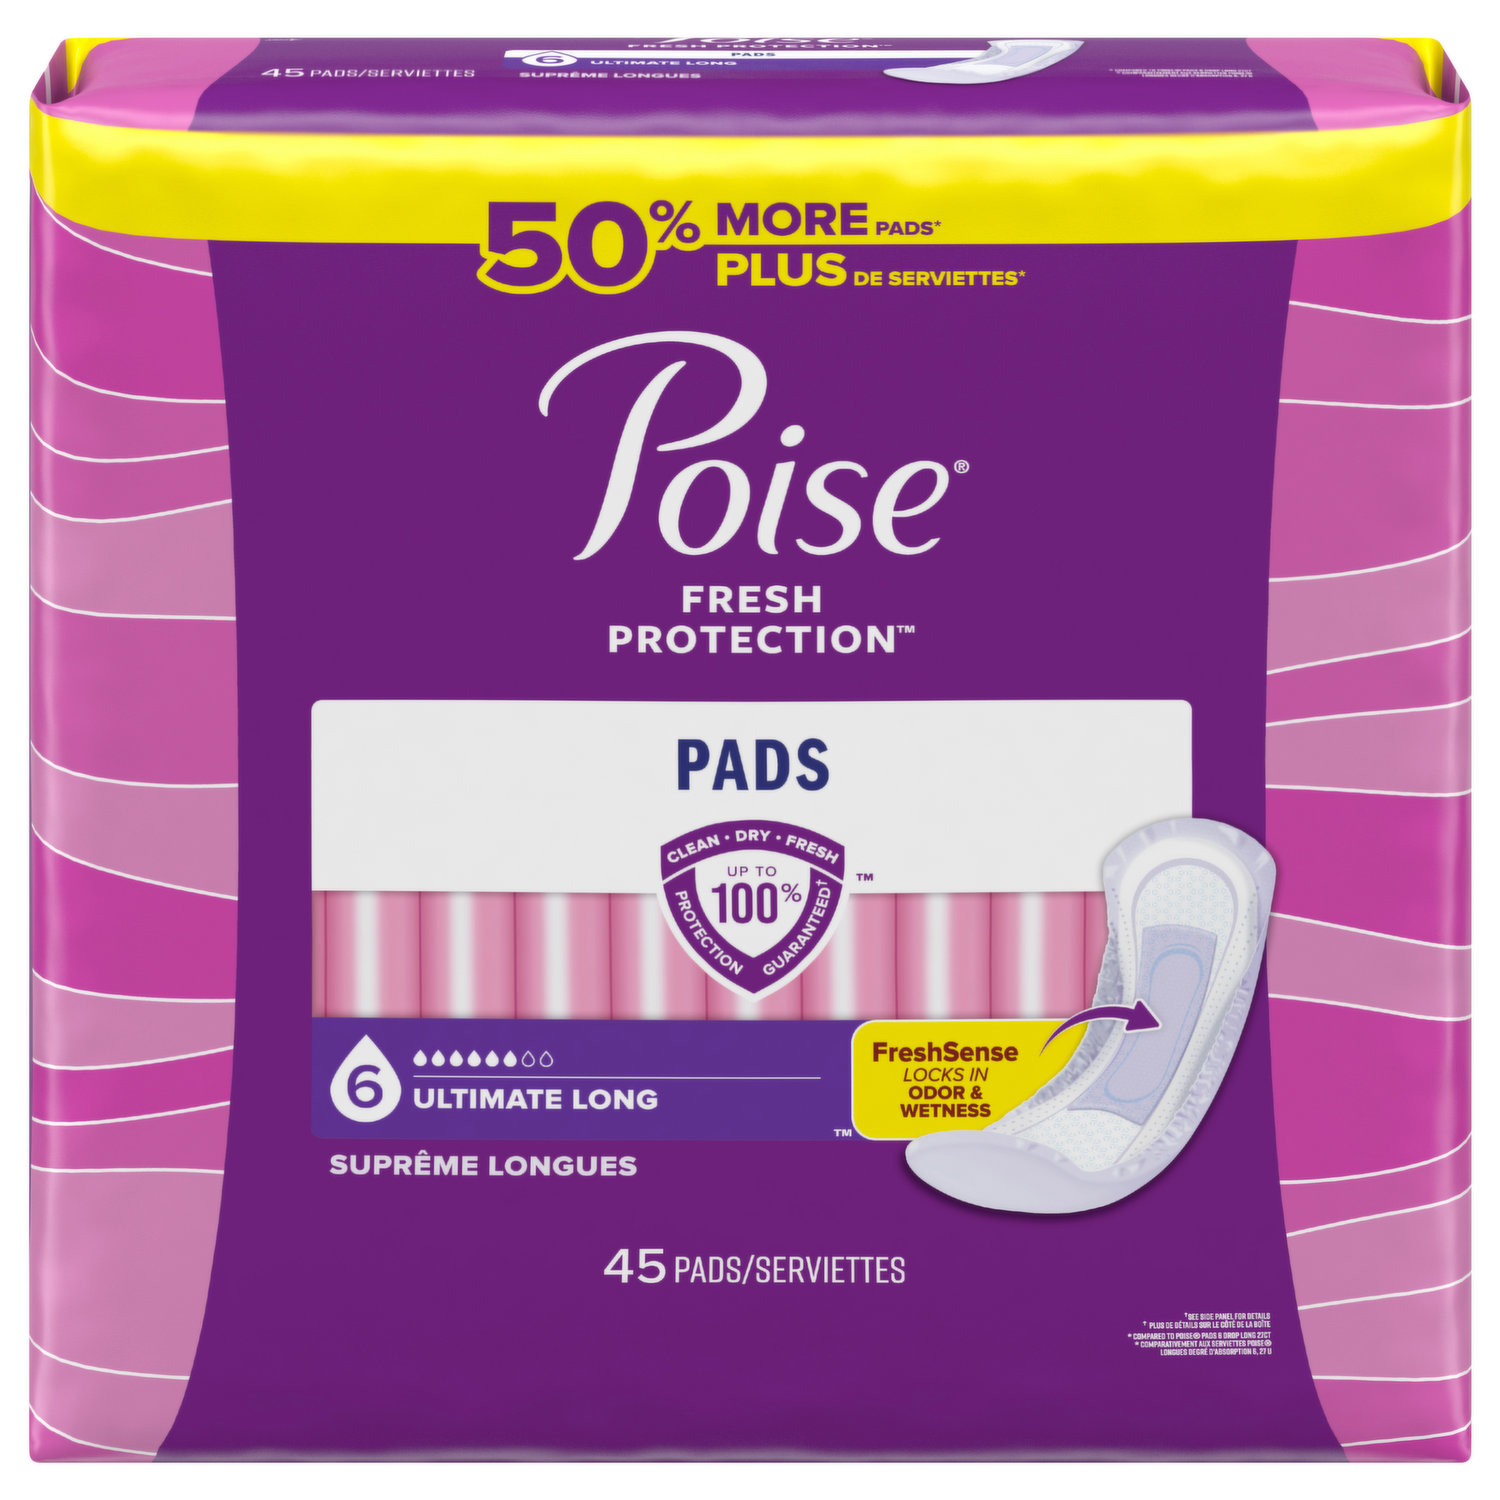 TopCare Pads, Moderate Absorbency 4, Long, Value Pack - Brookshire's